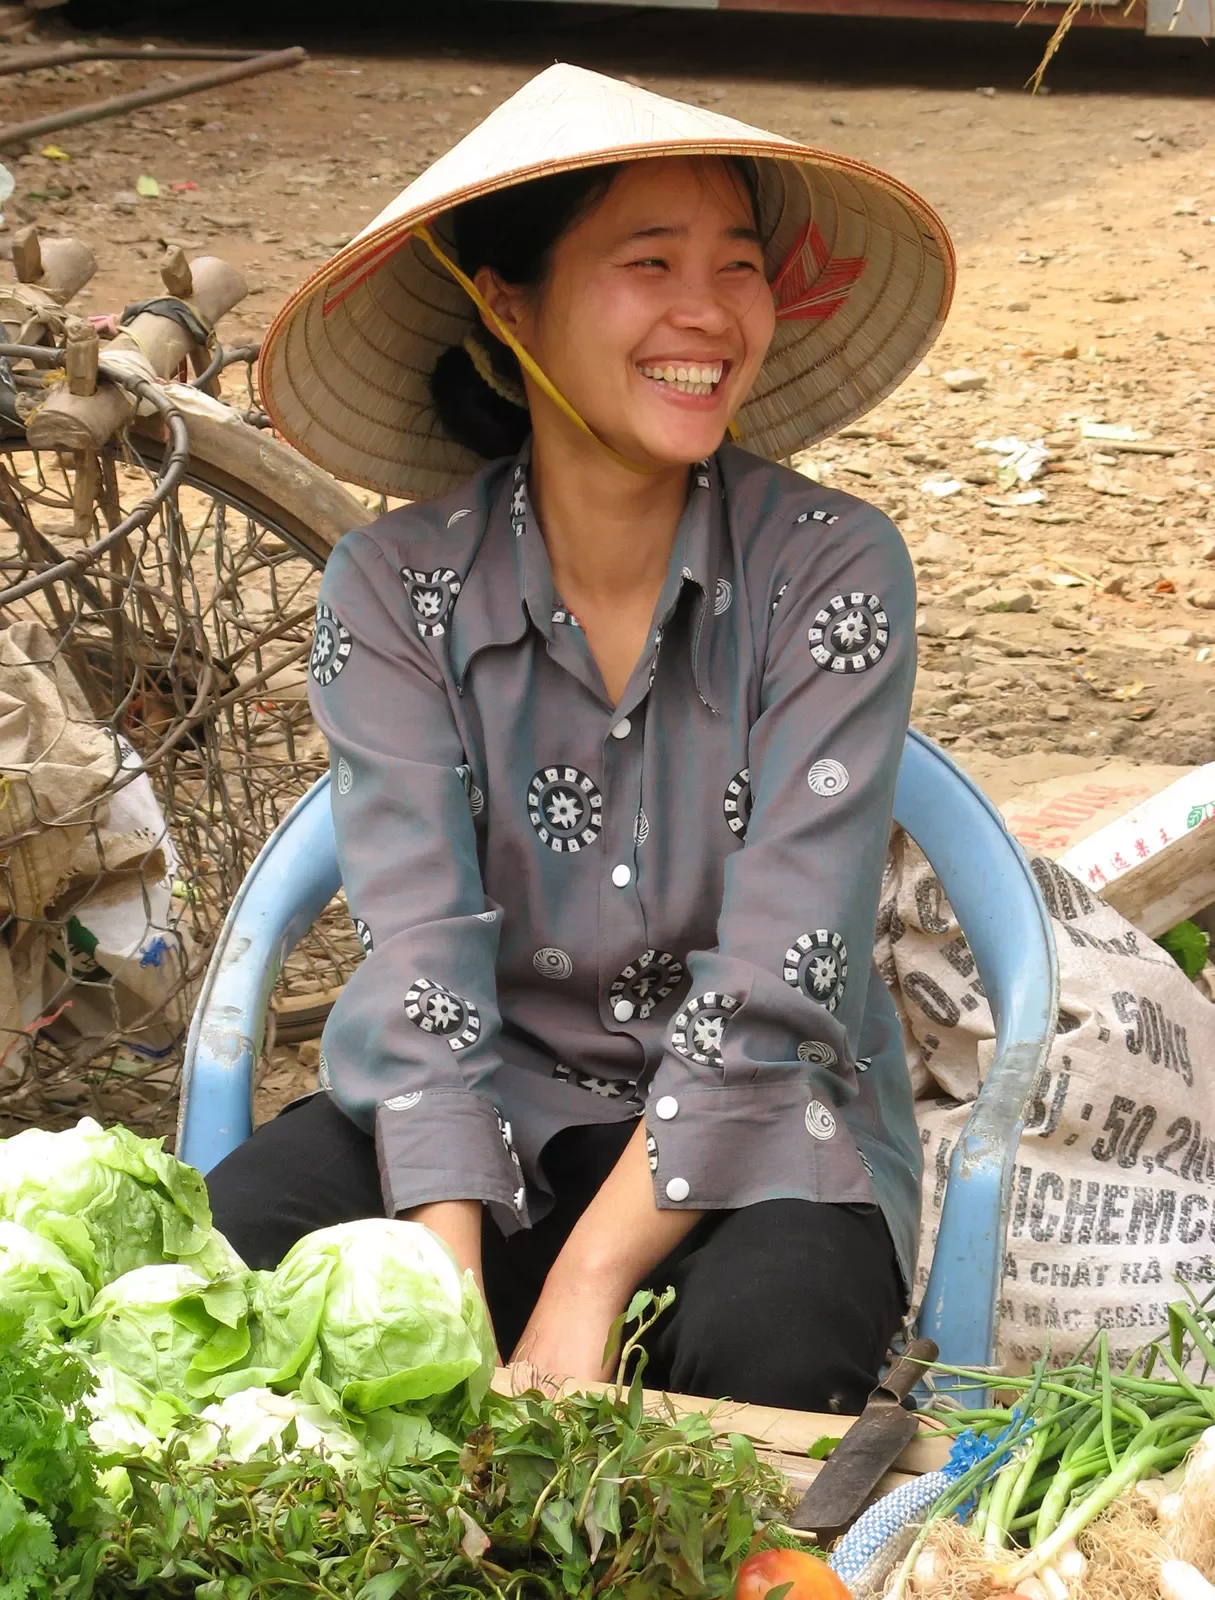 Local smiling in front of vegetable stand.